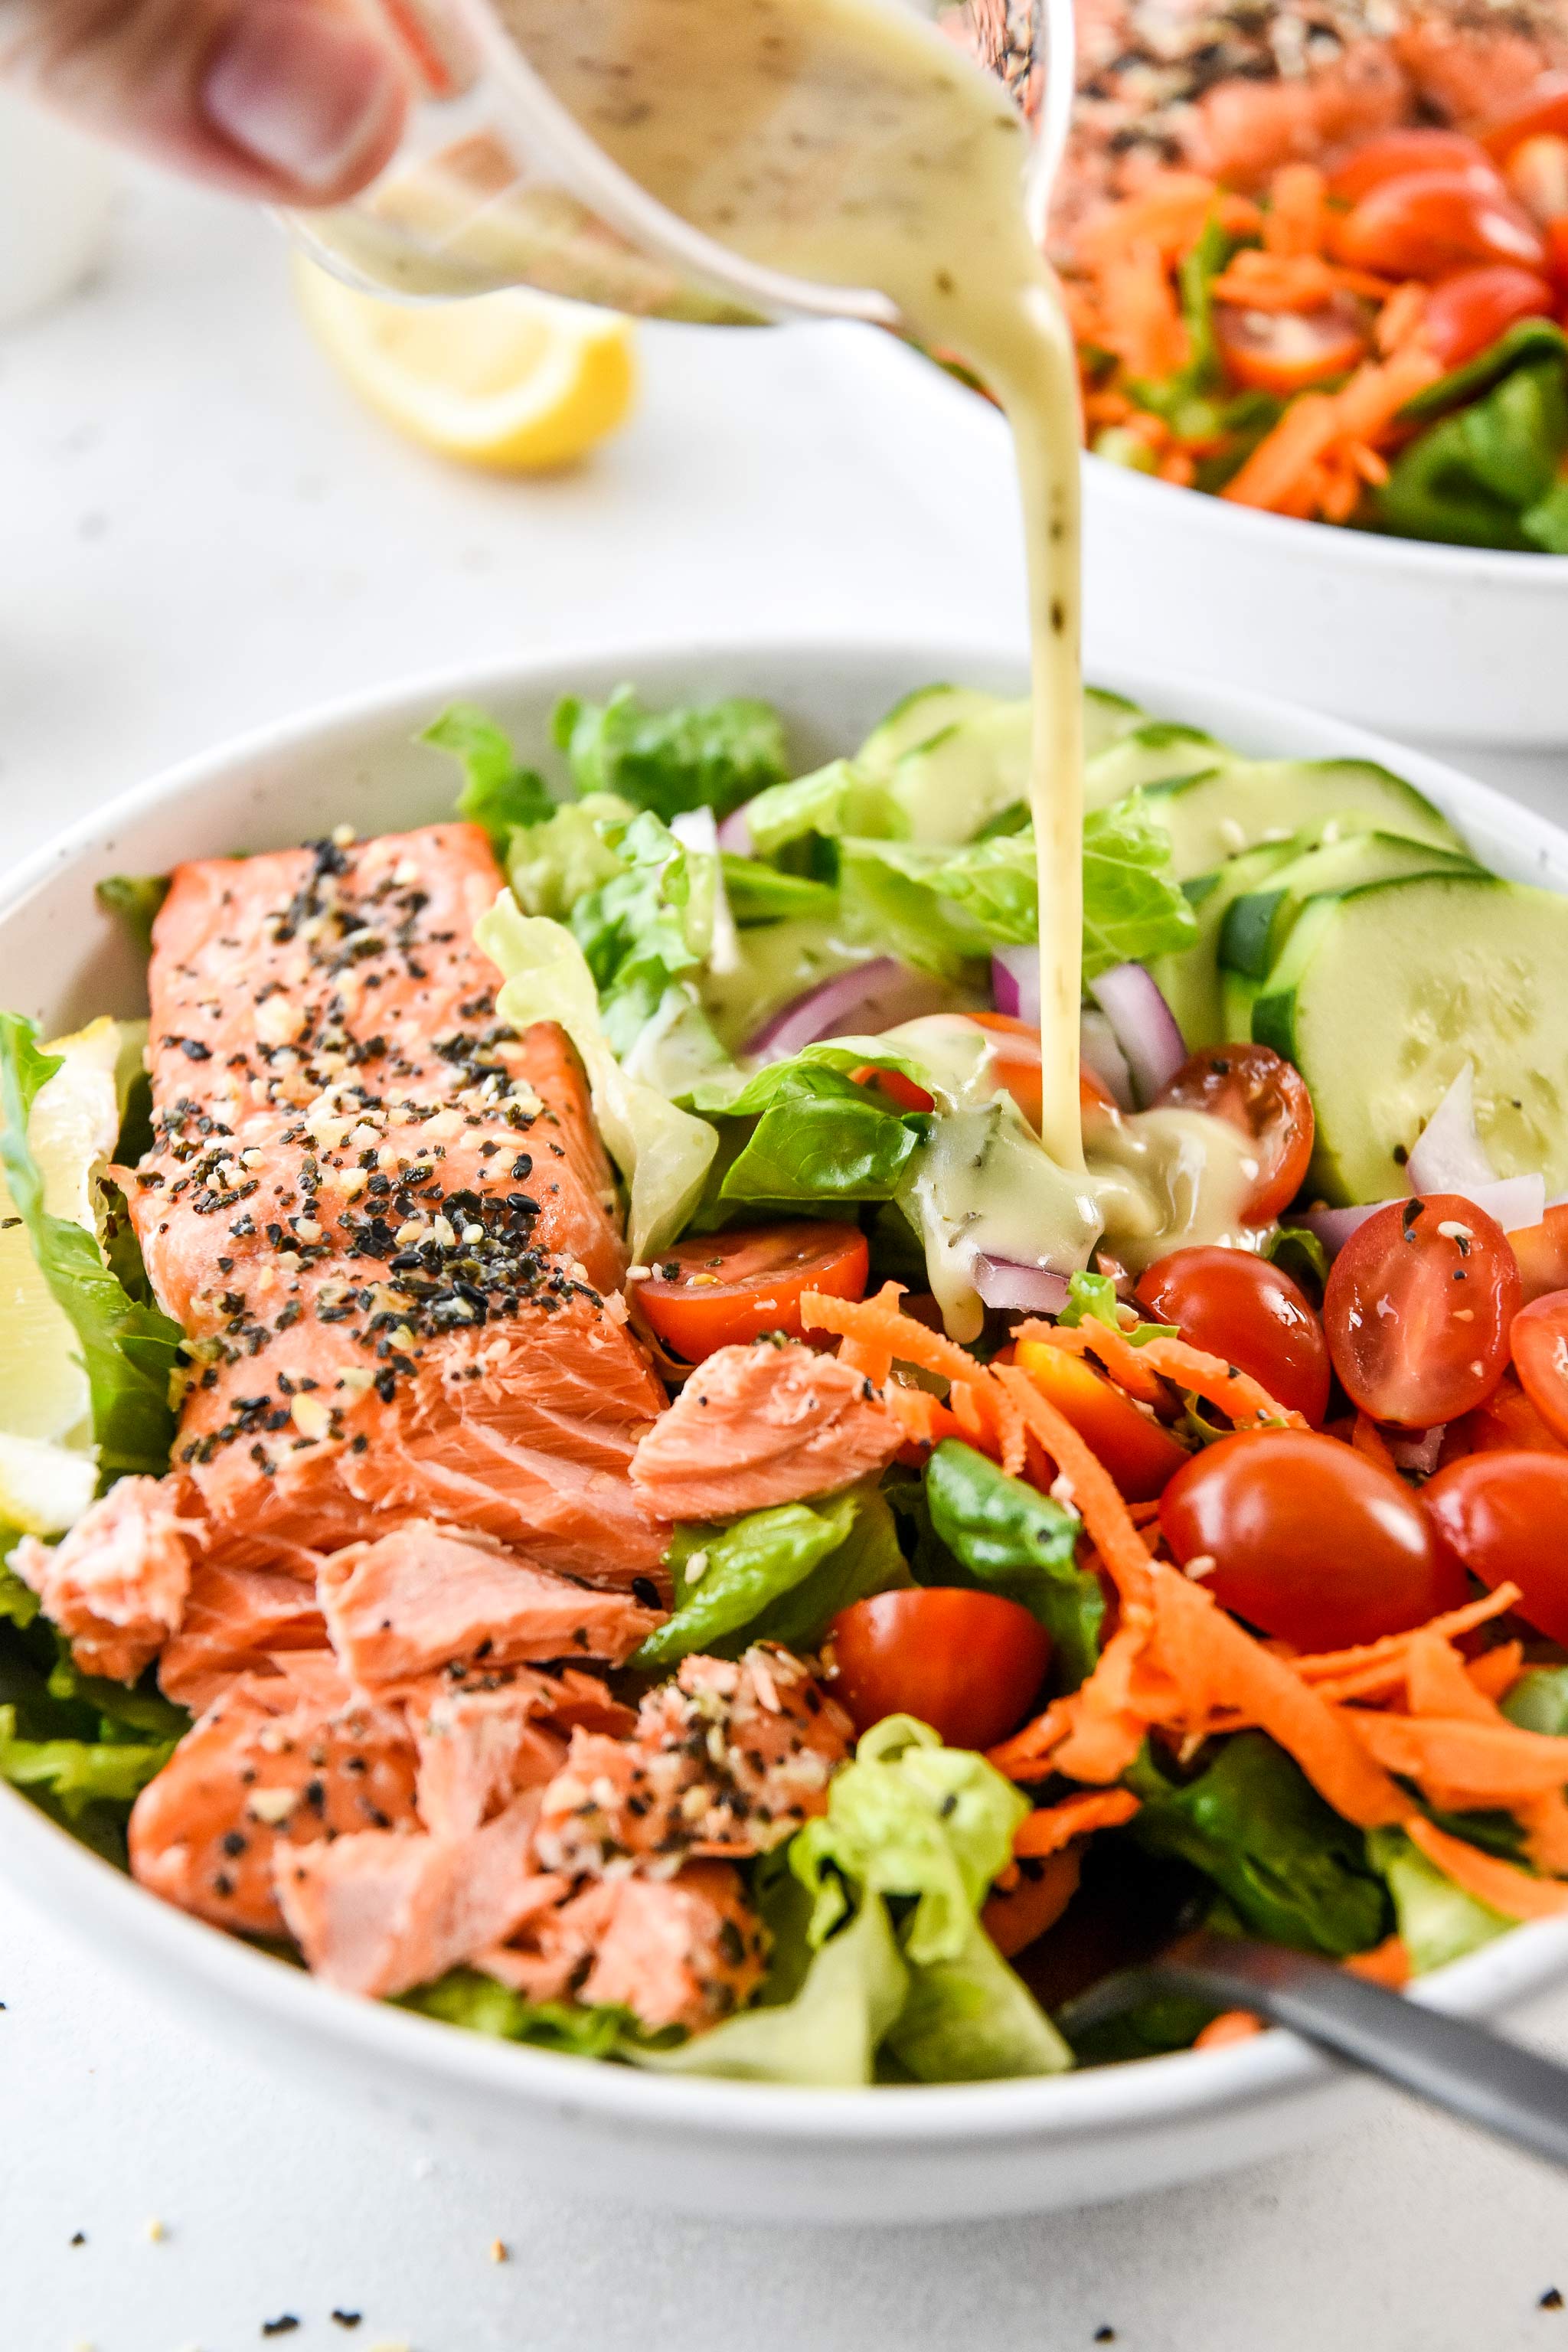 adding dressing to the everything bagel baked salmon salad